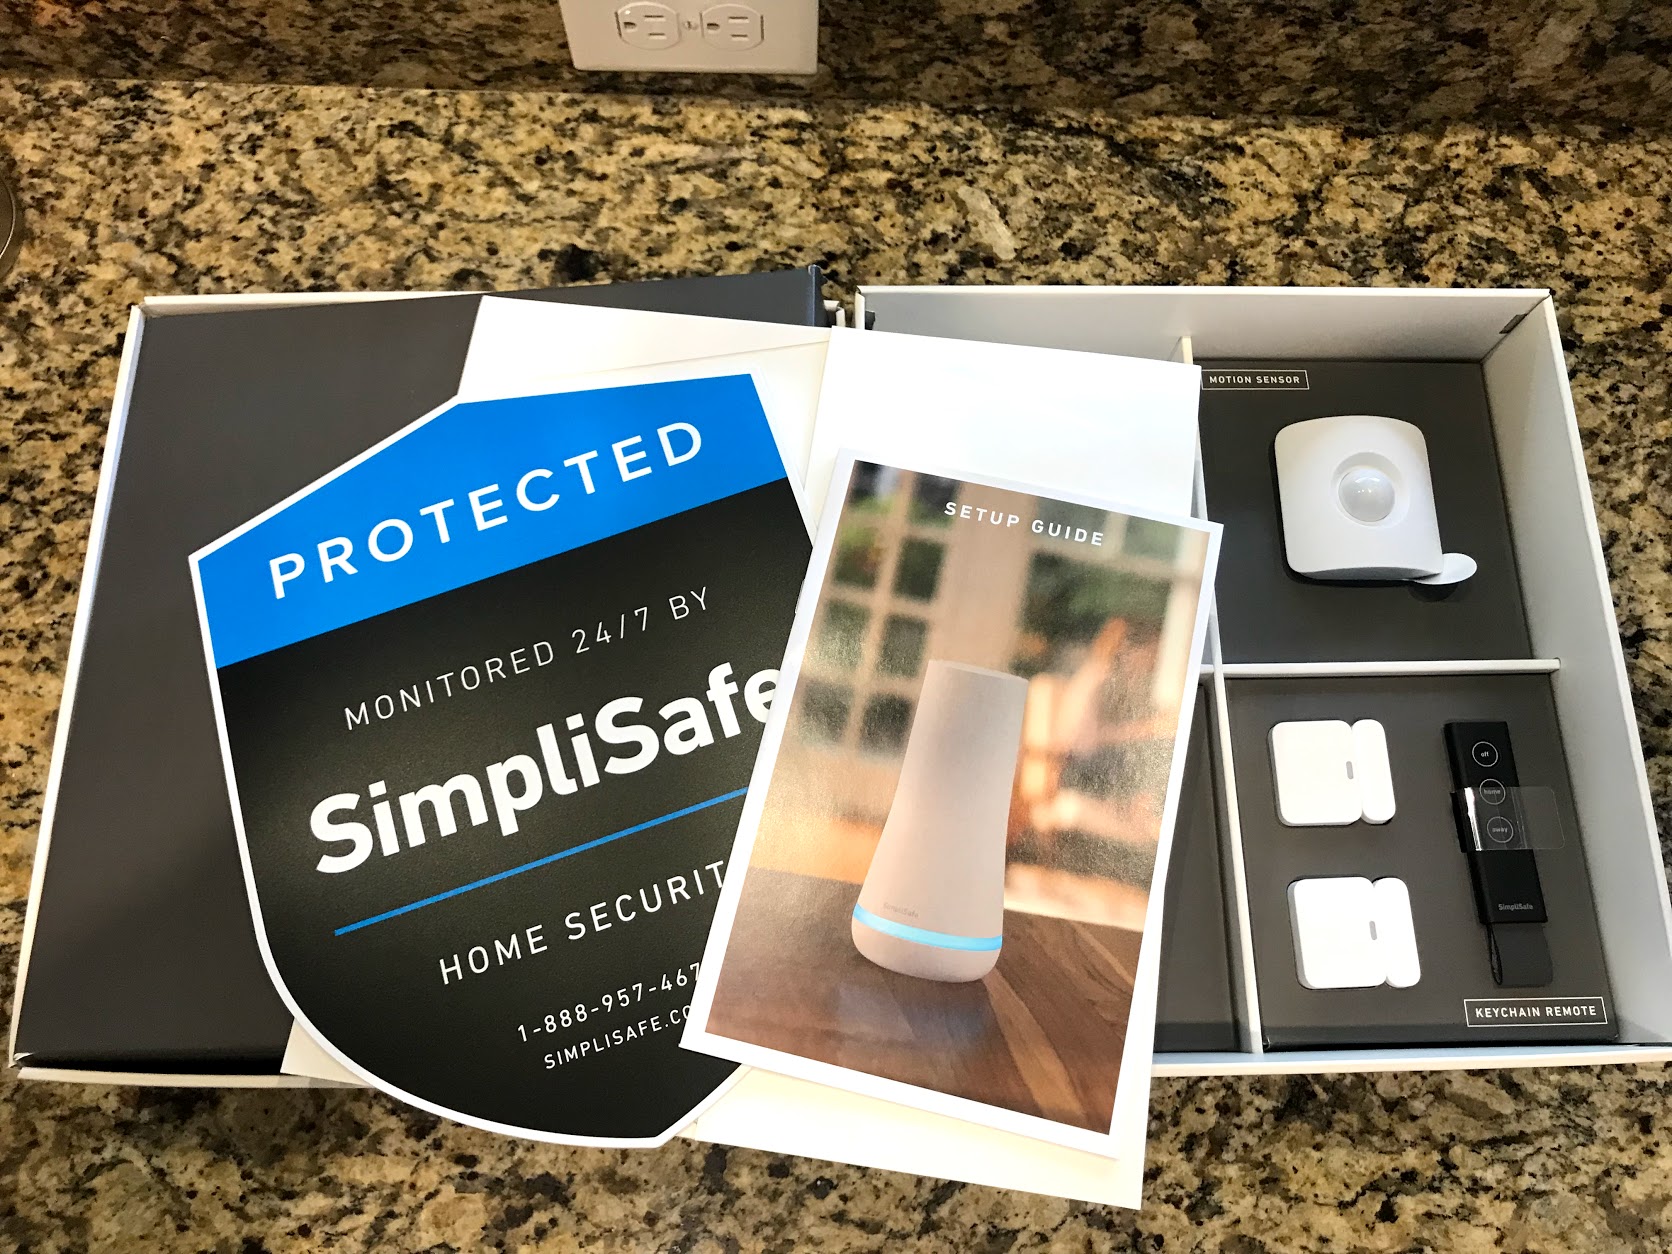 Who is SimpliSafe owned by?